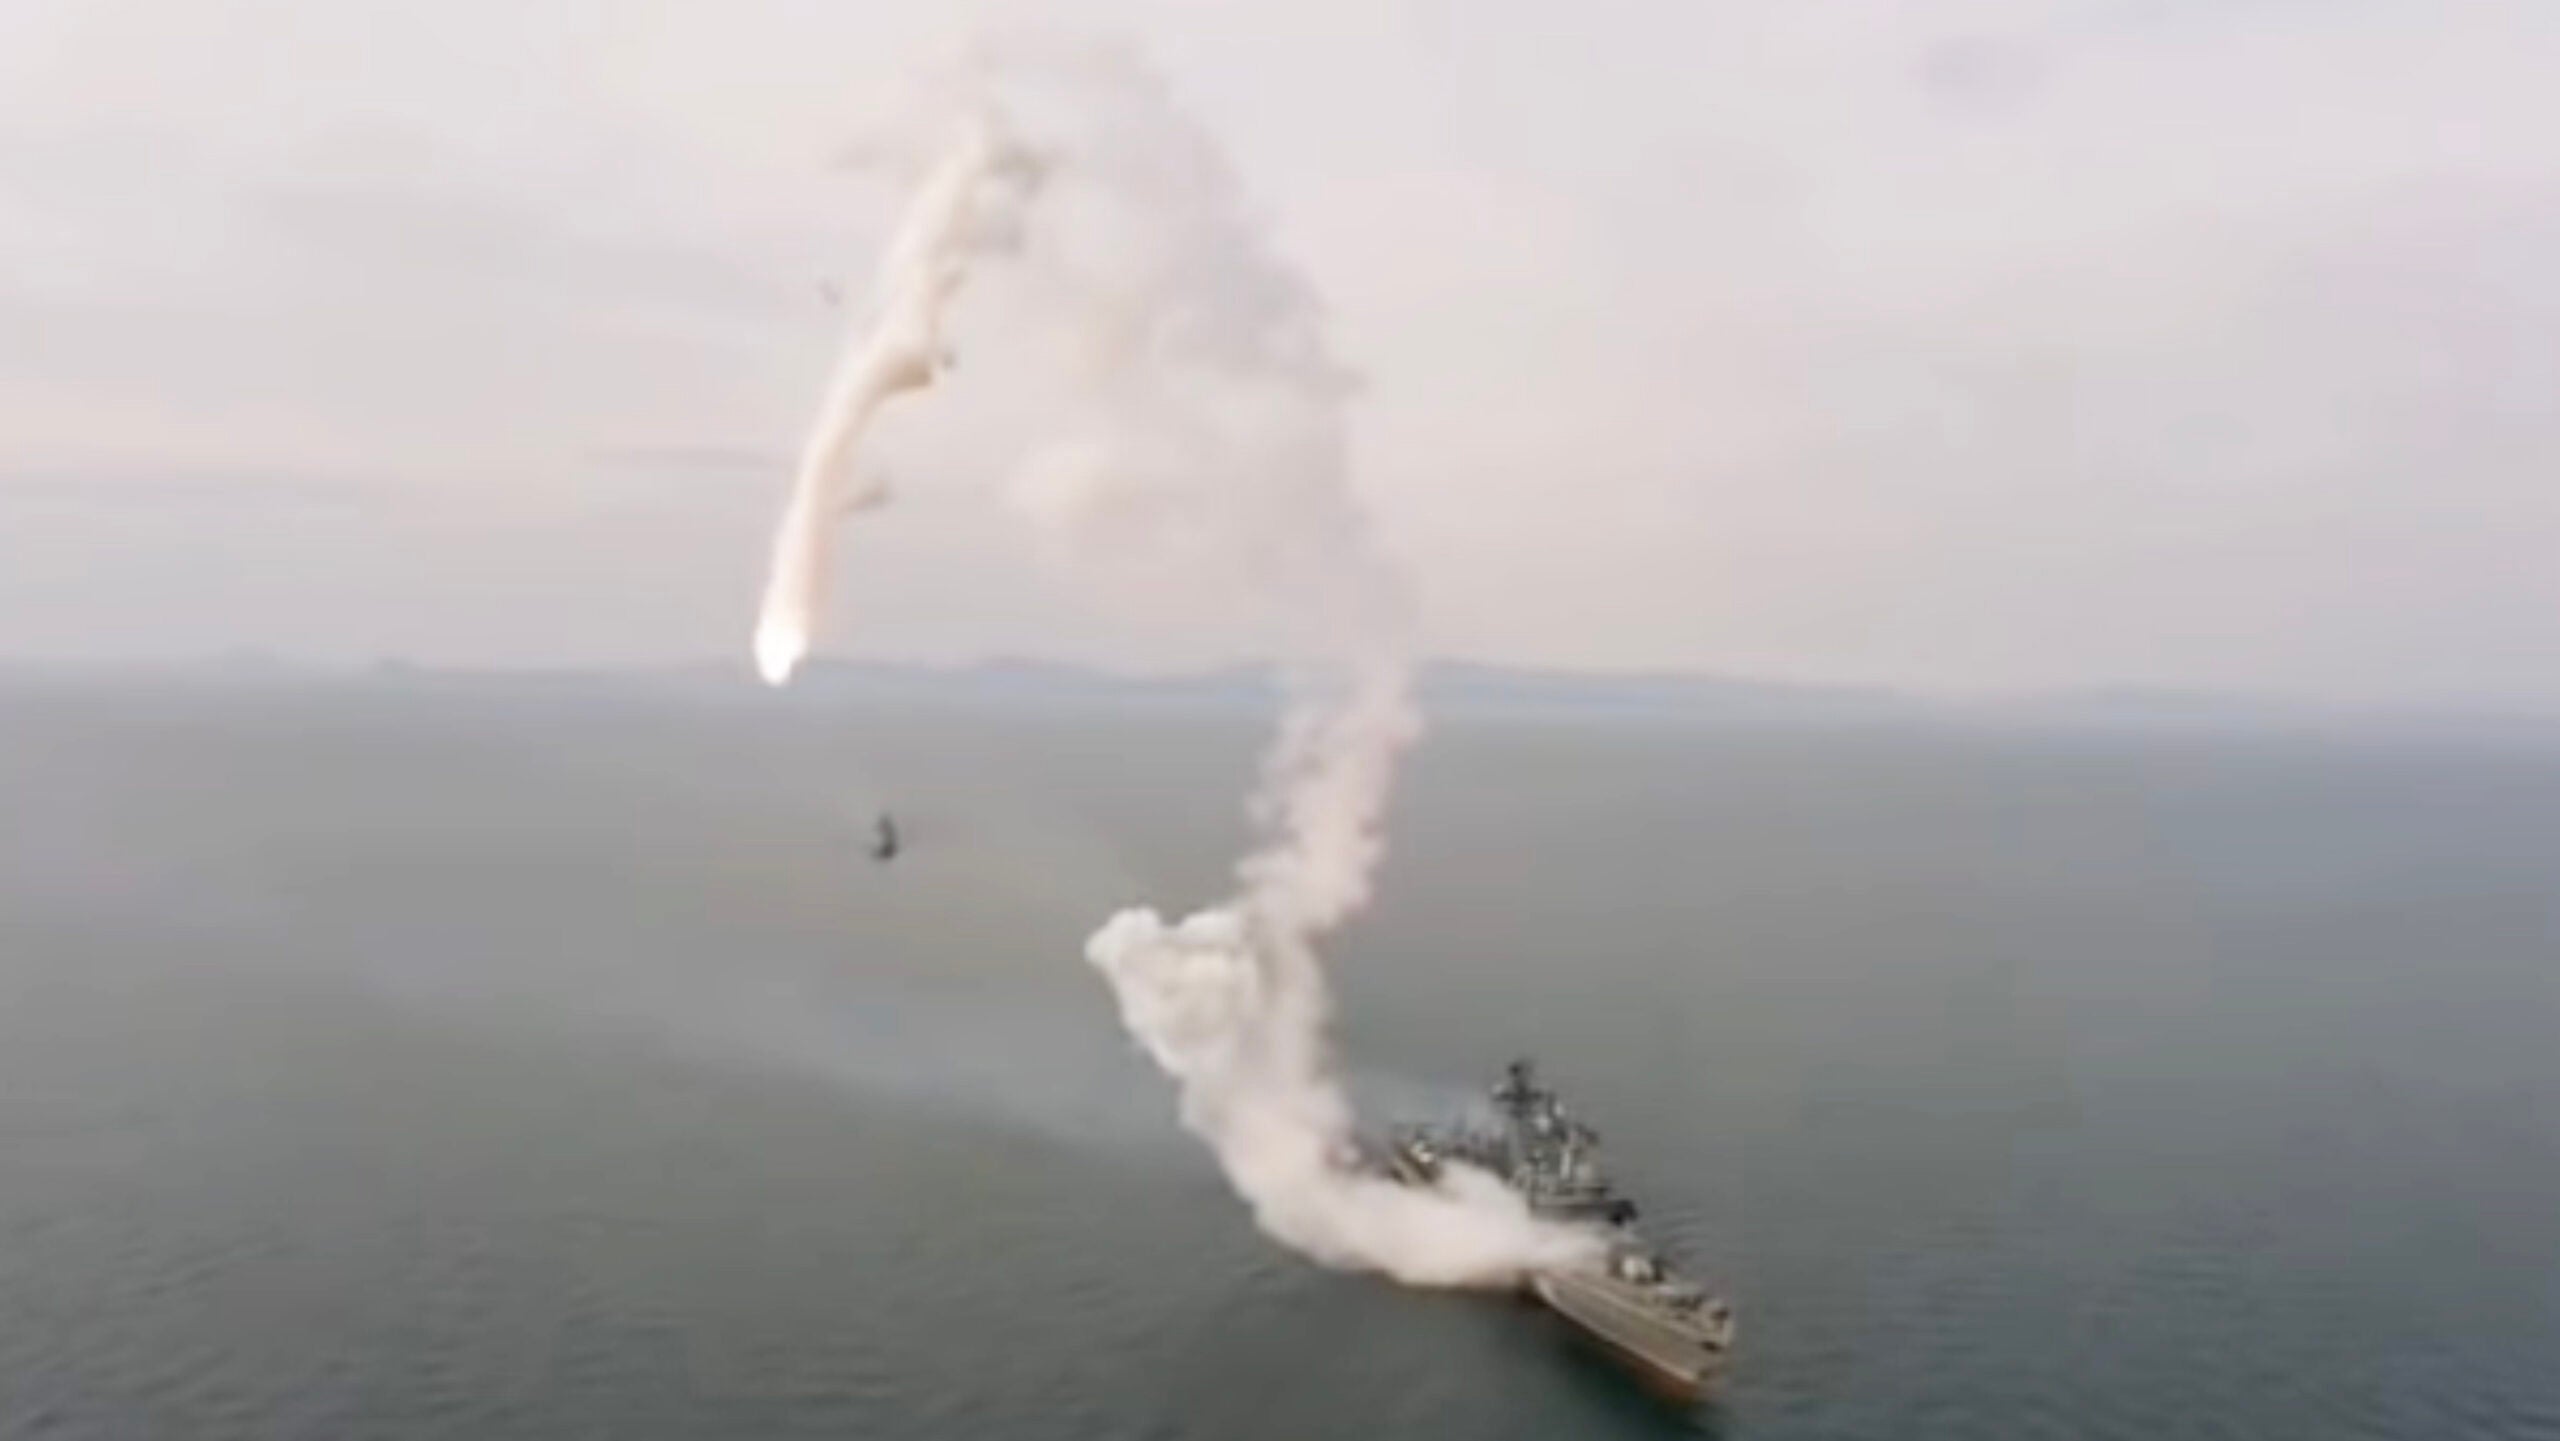 cruise missile impact video